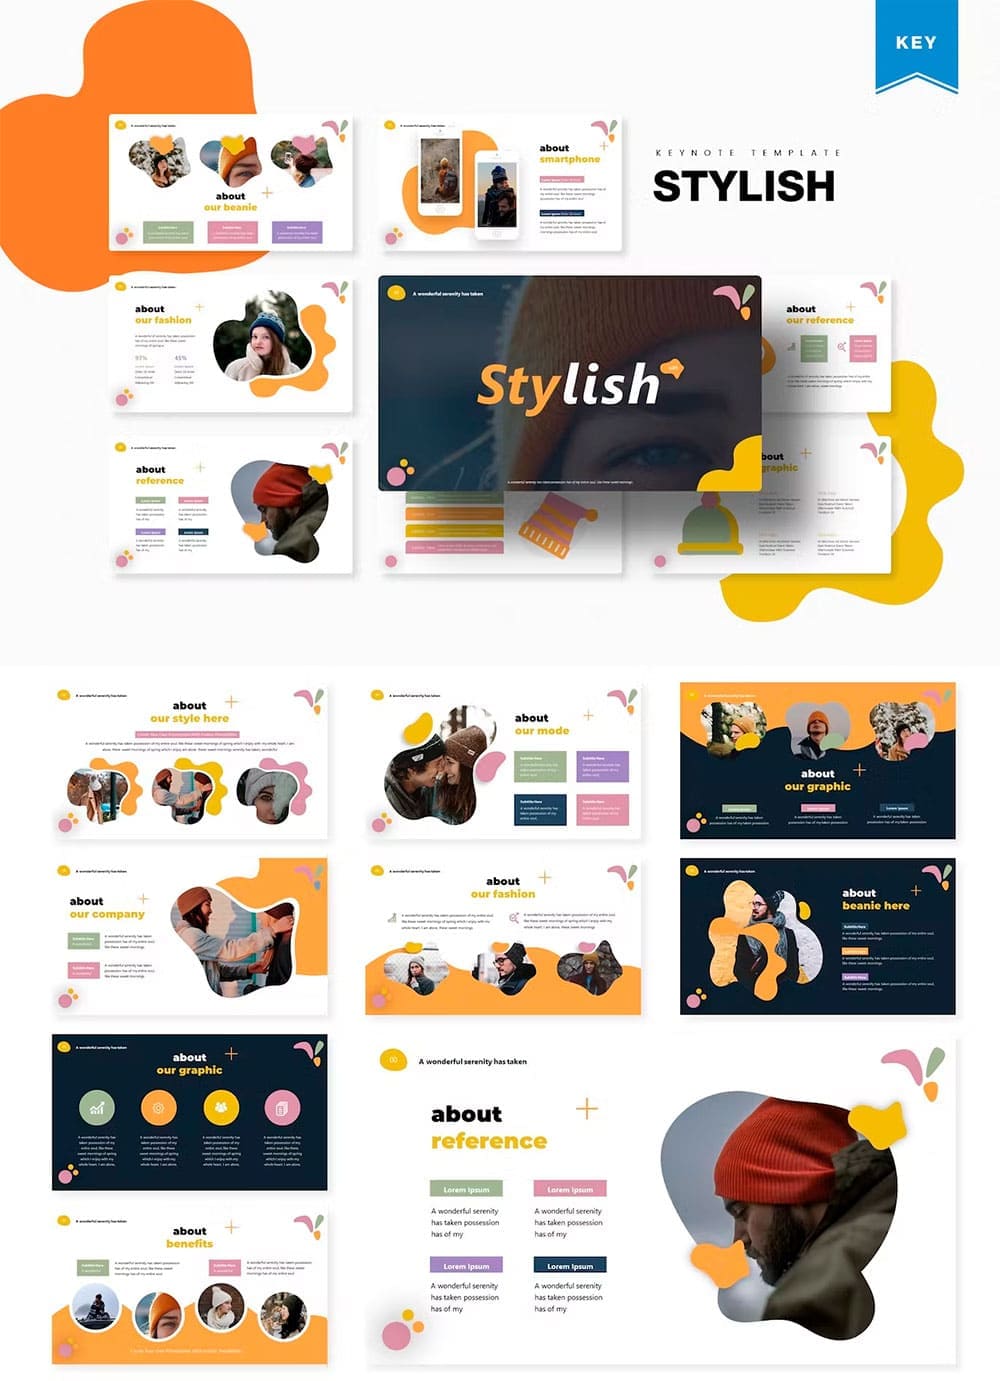 Stylish keynote template, picture for pinterest.